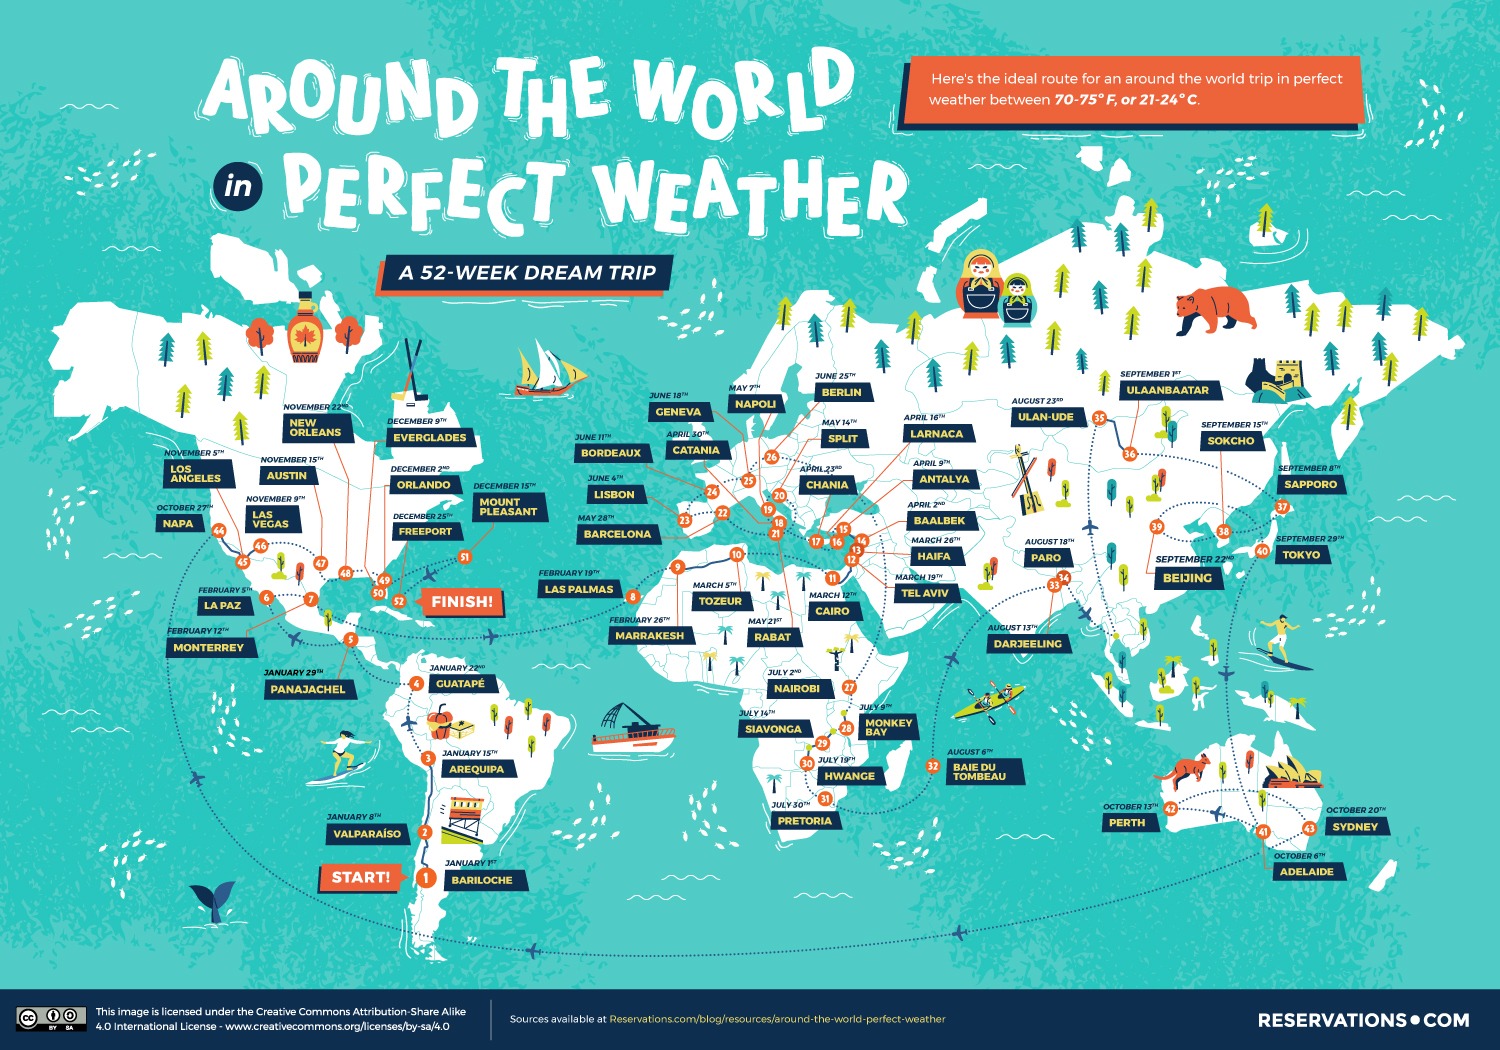 Weather Map Of The World Around the World in Perfect Weather: A 52 Week Dream Trip 